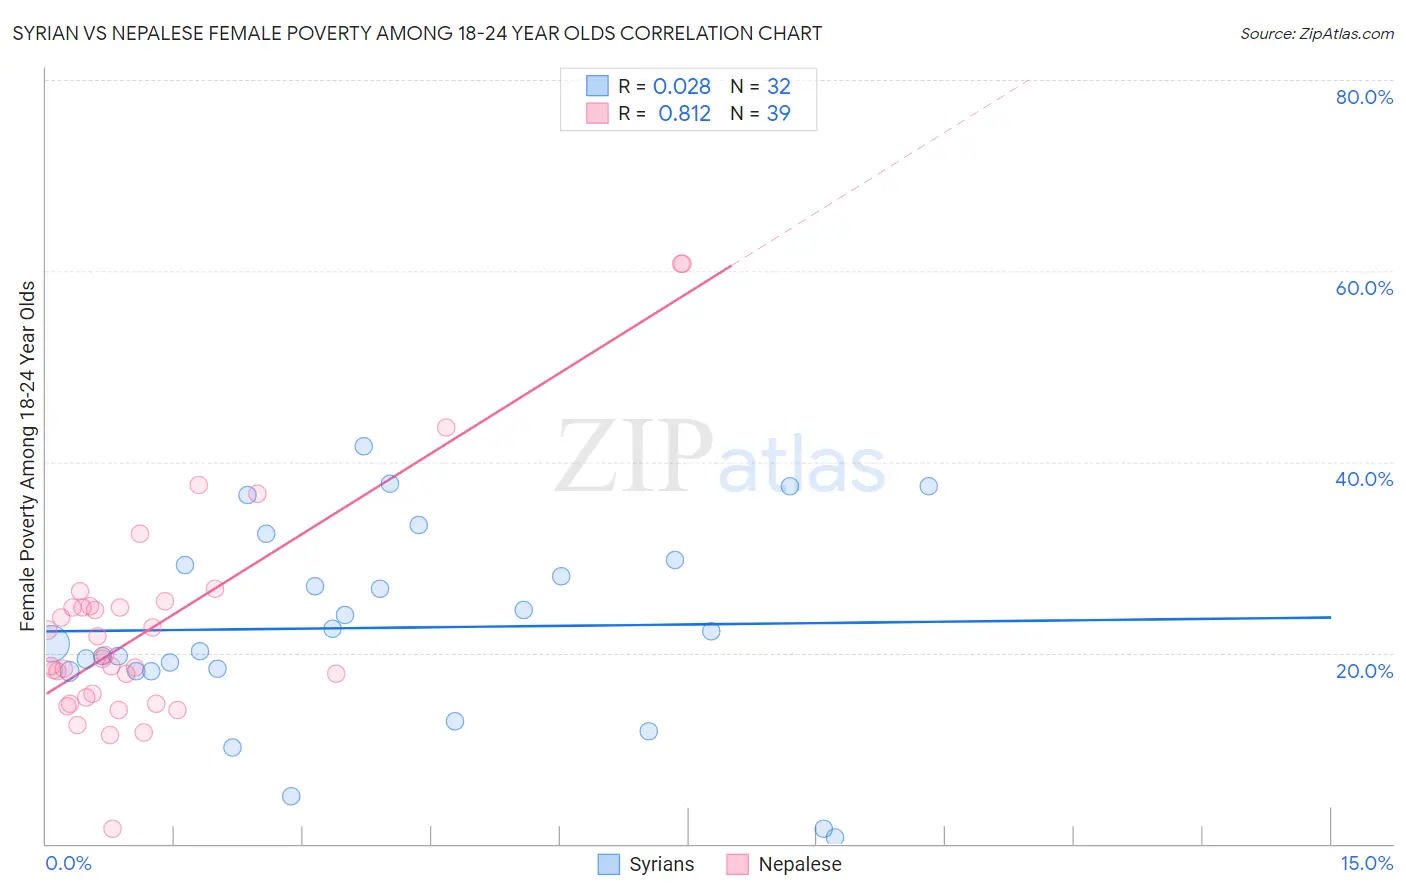 Syrian vs Nepalese Female Poverty Among 18-24 Year Olds